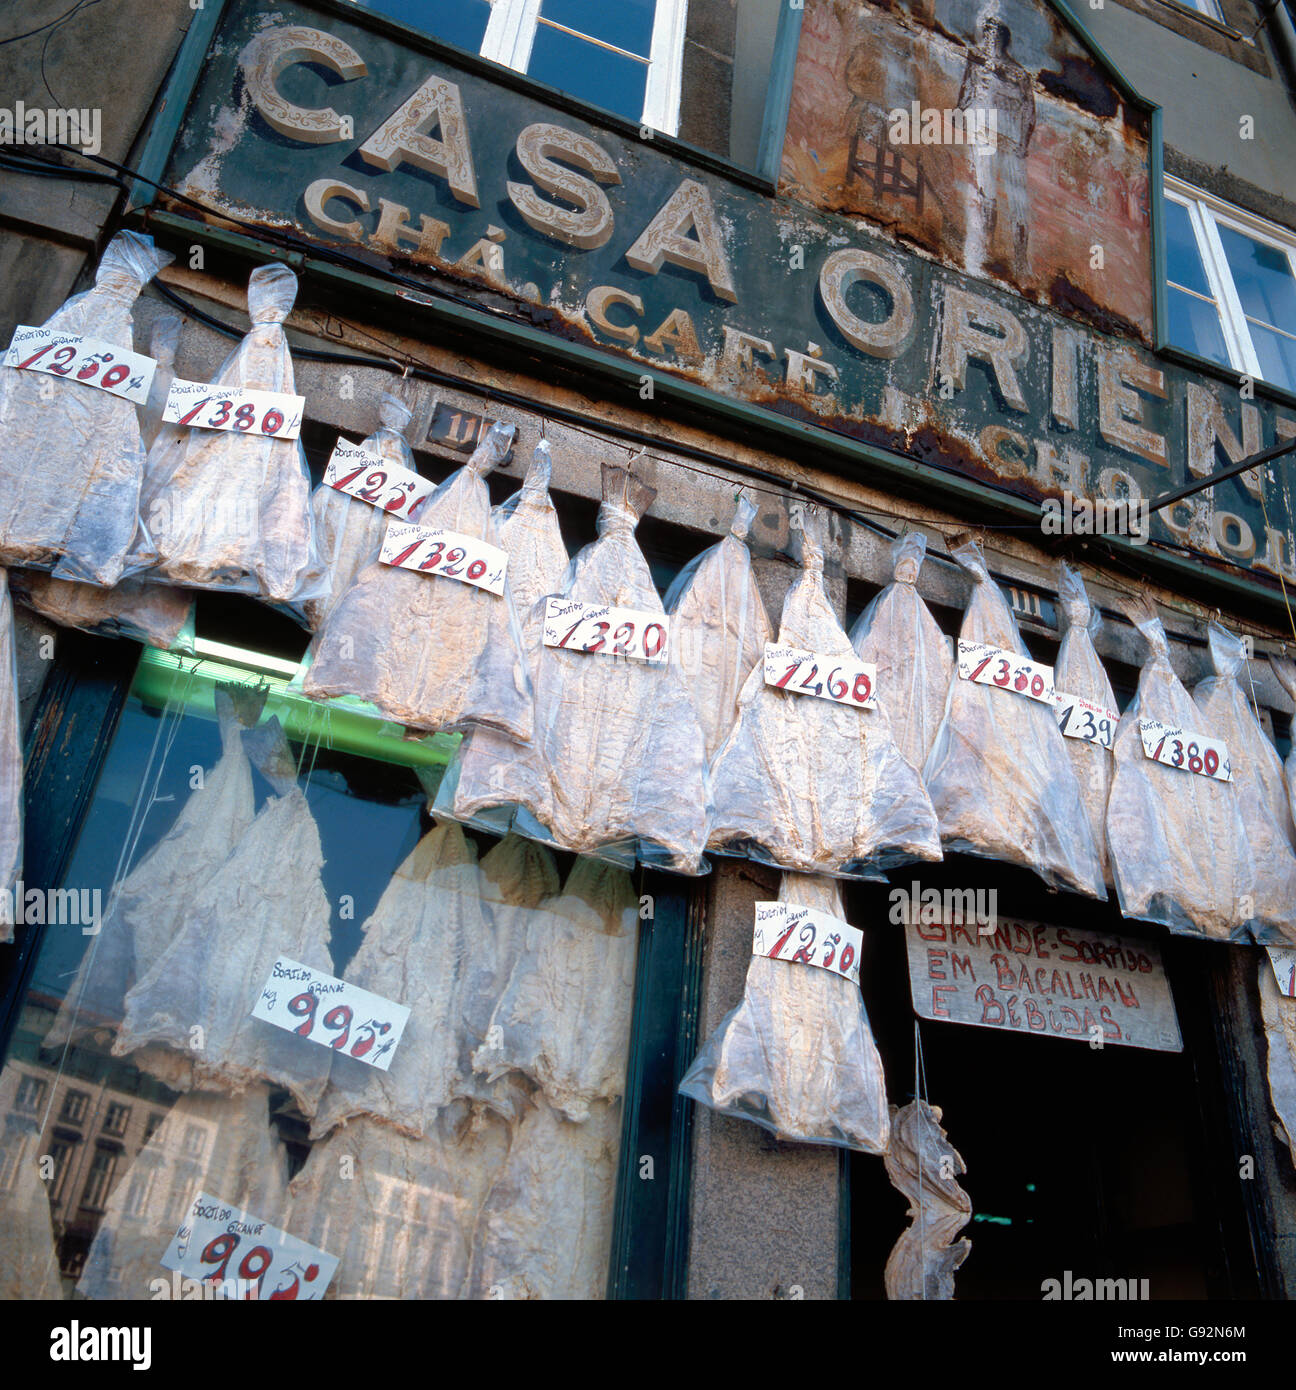 Old fashioned bacalhau shop in Porto, Portugal. Bacalhau is the Portuguese word for salted codfish Stock Photo